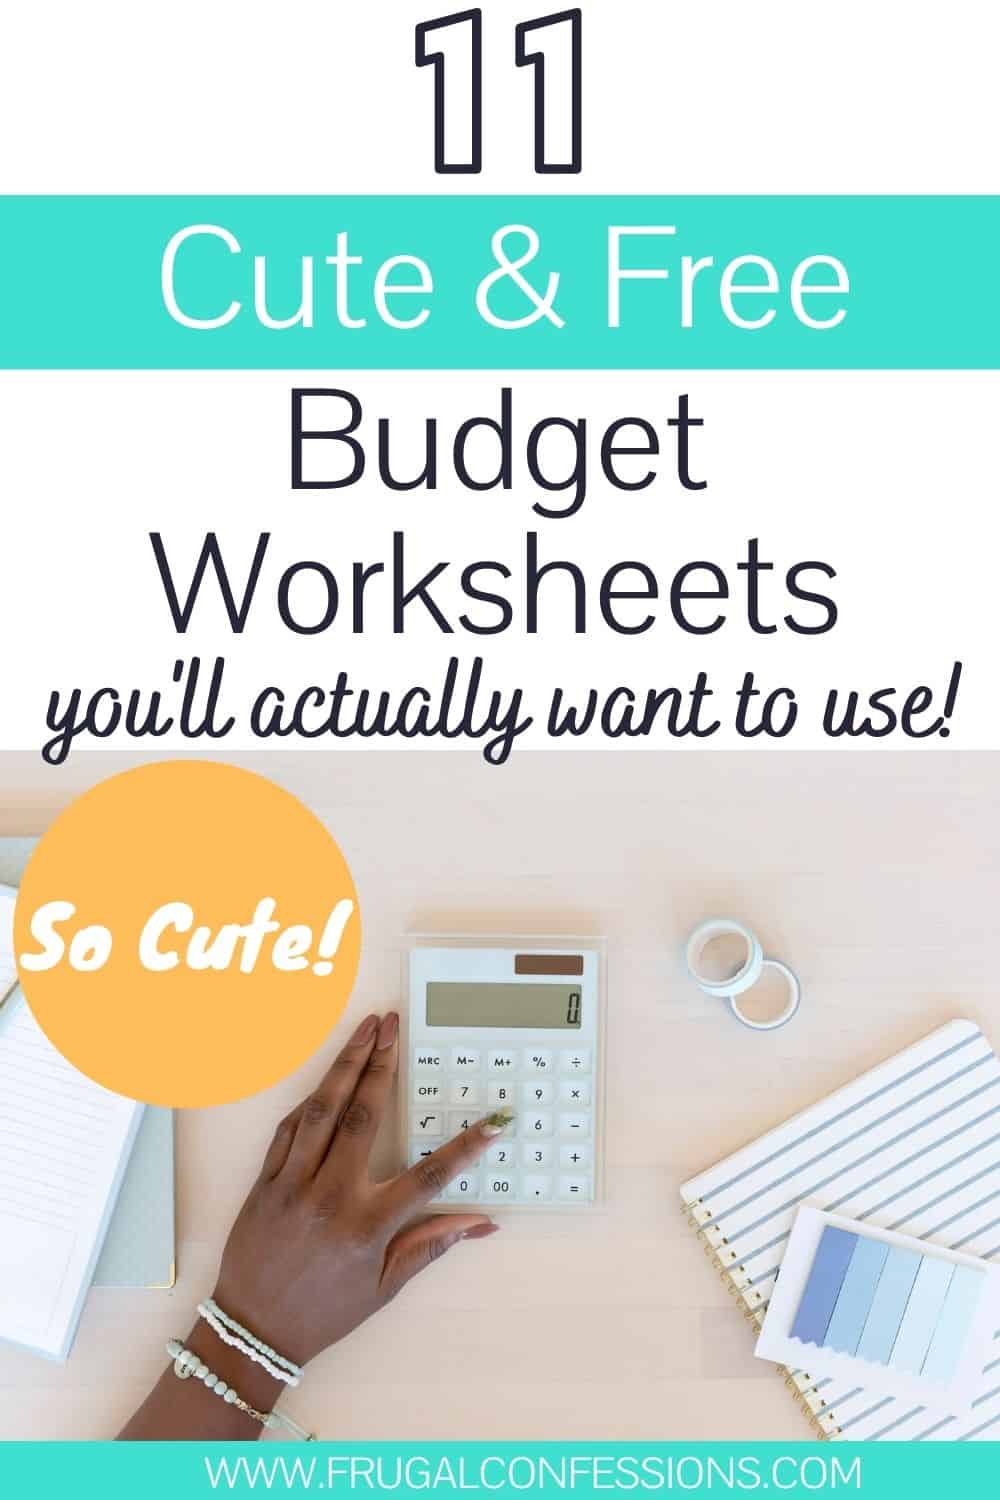 screenshot of woman at desk with calculator, text overlay "11 cute and free monthly budget worksheets"